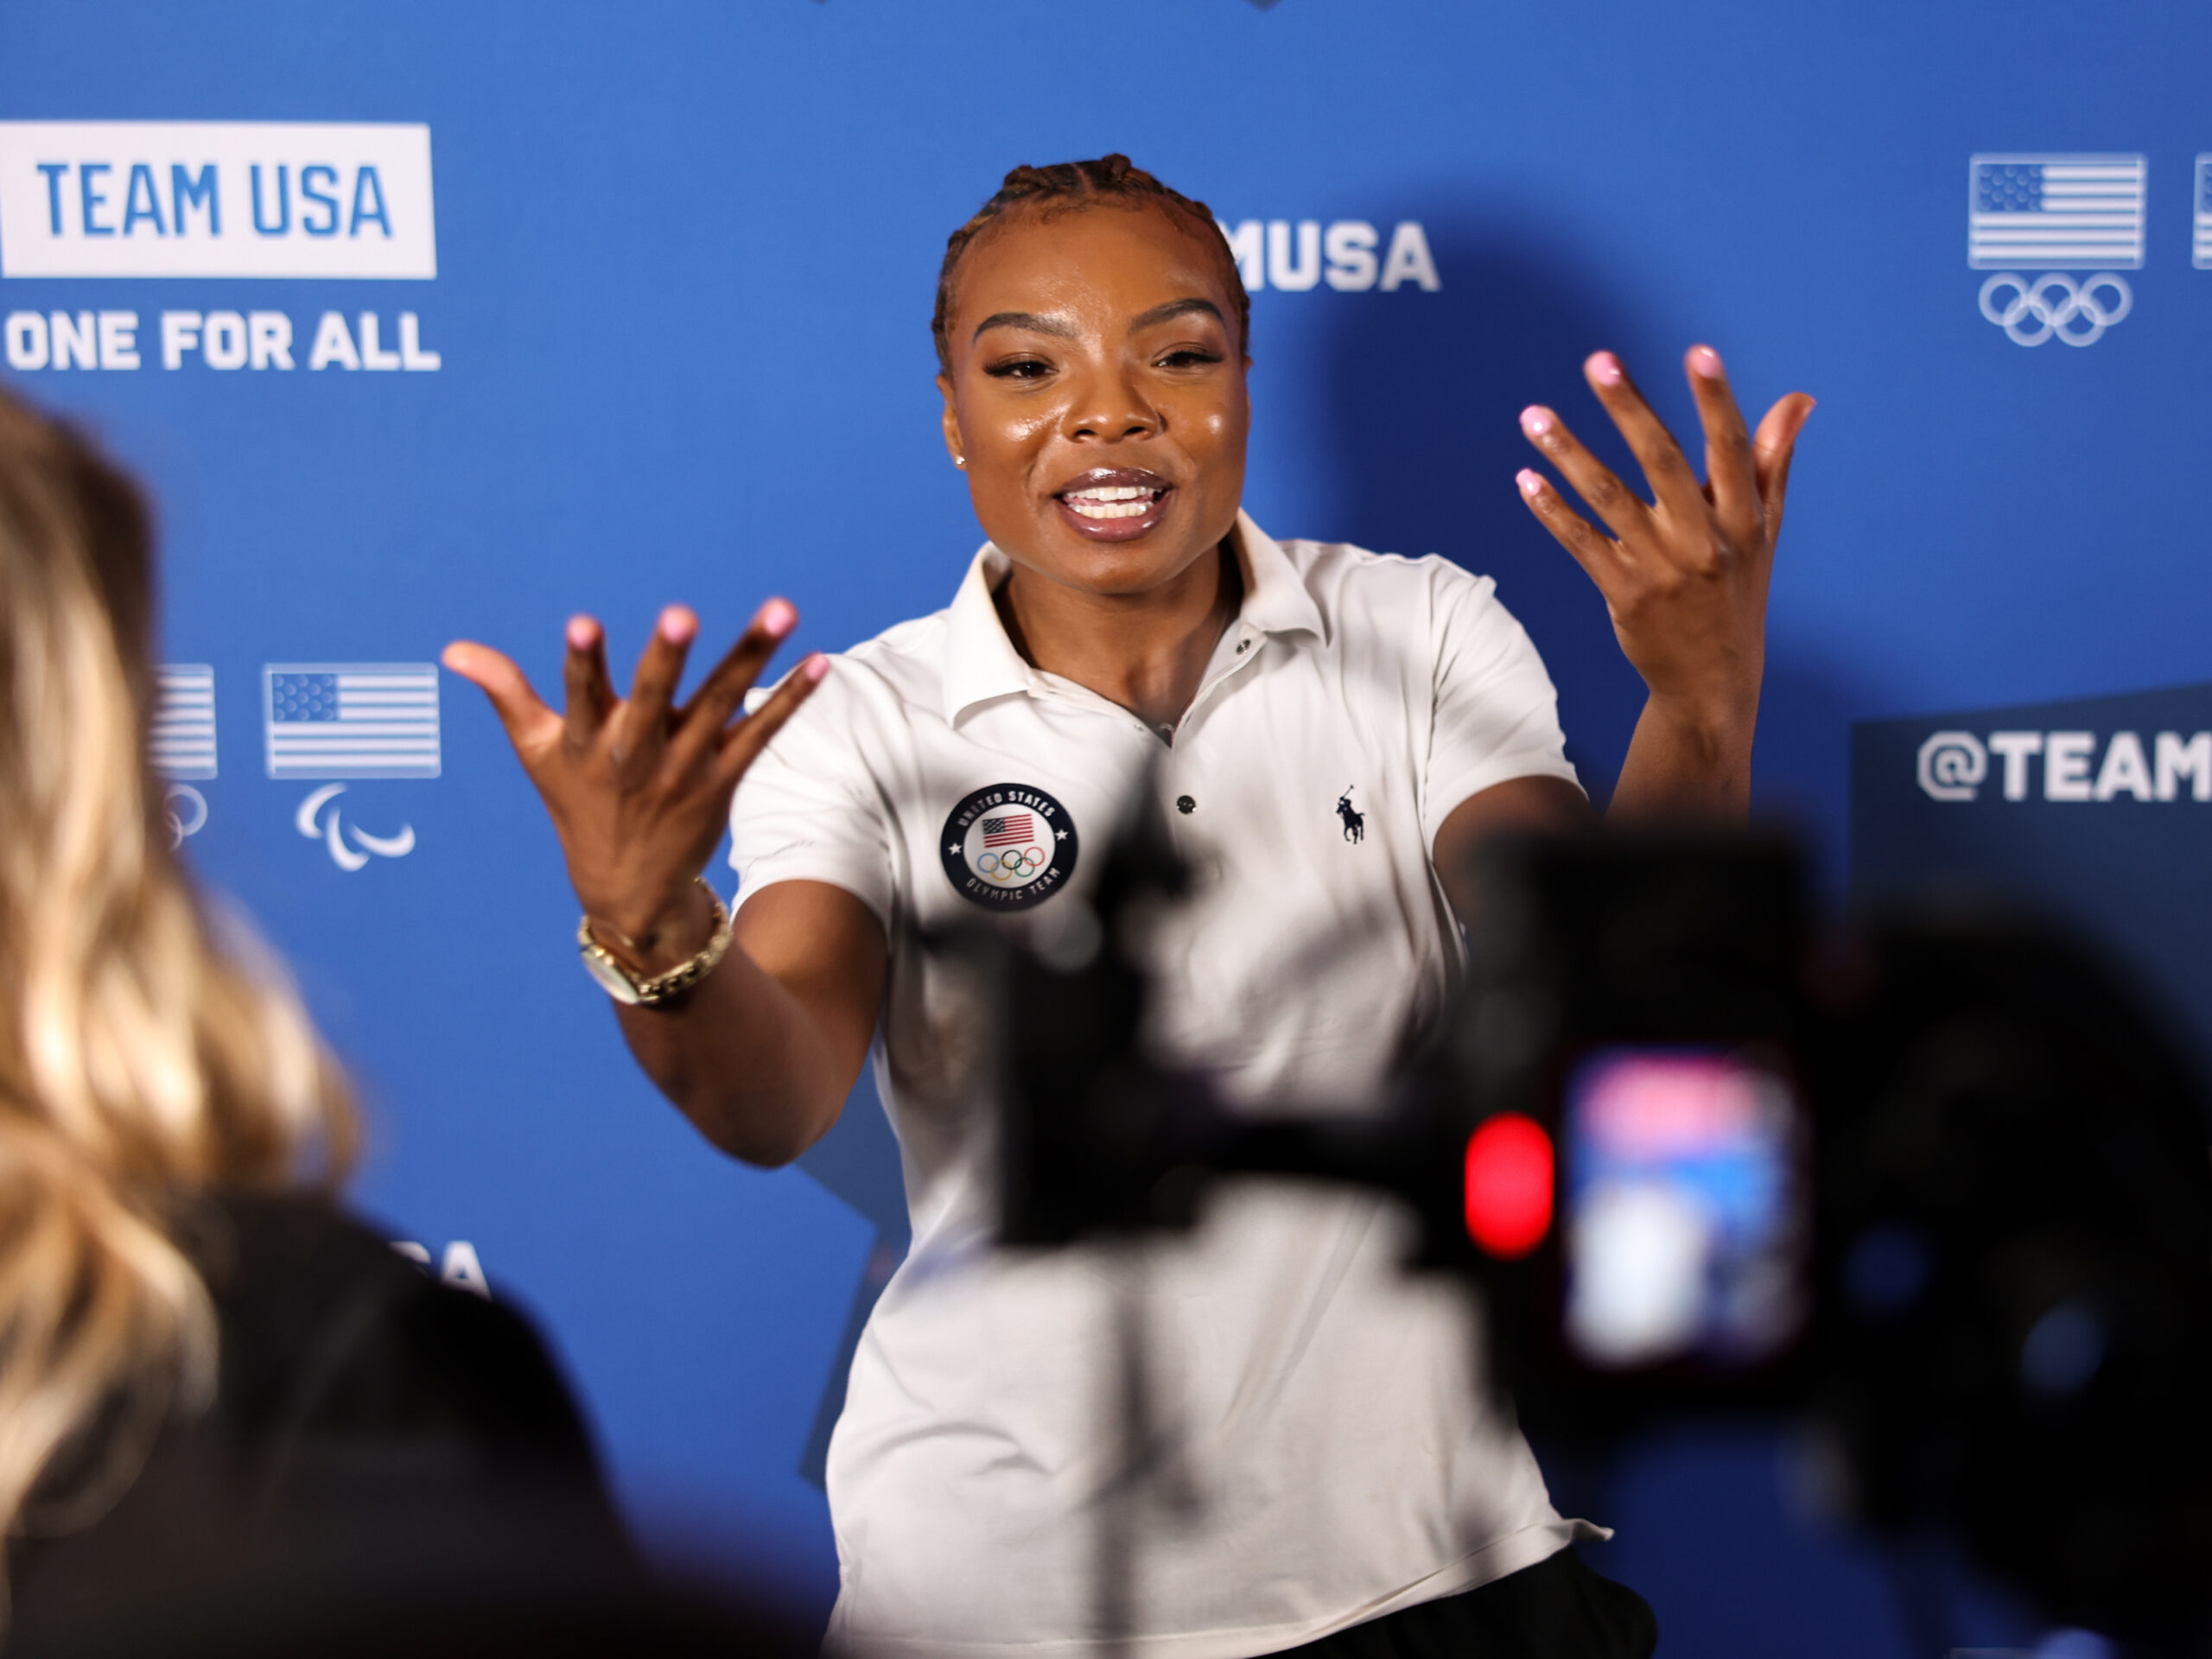 Boxer Morelle McCane speaks to reporters at the Team USA Media Summit on Monday in New York City.